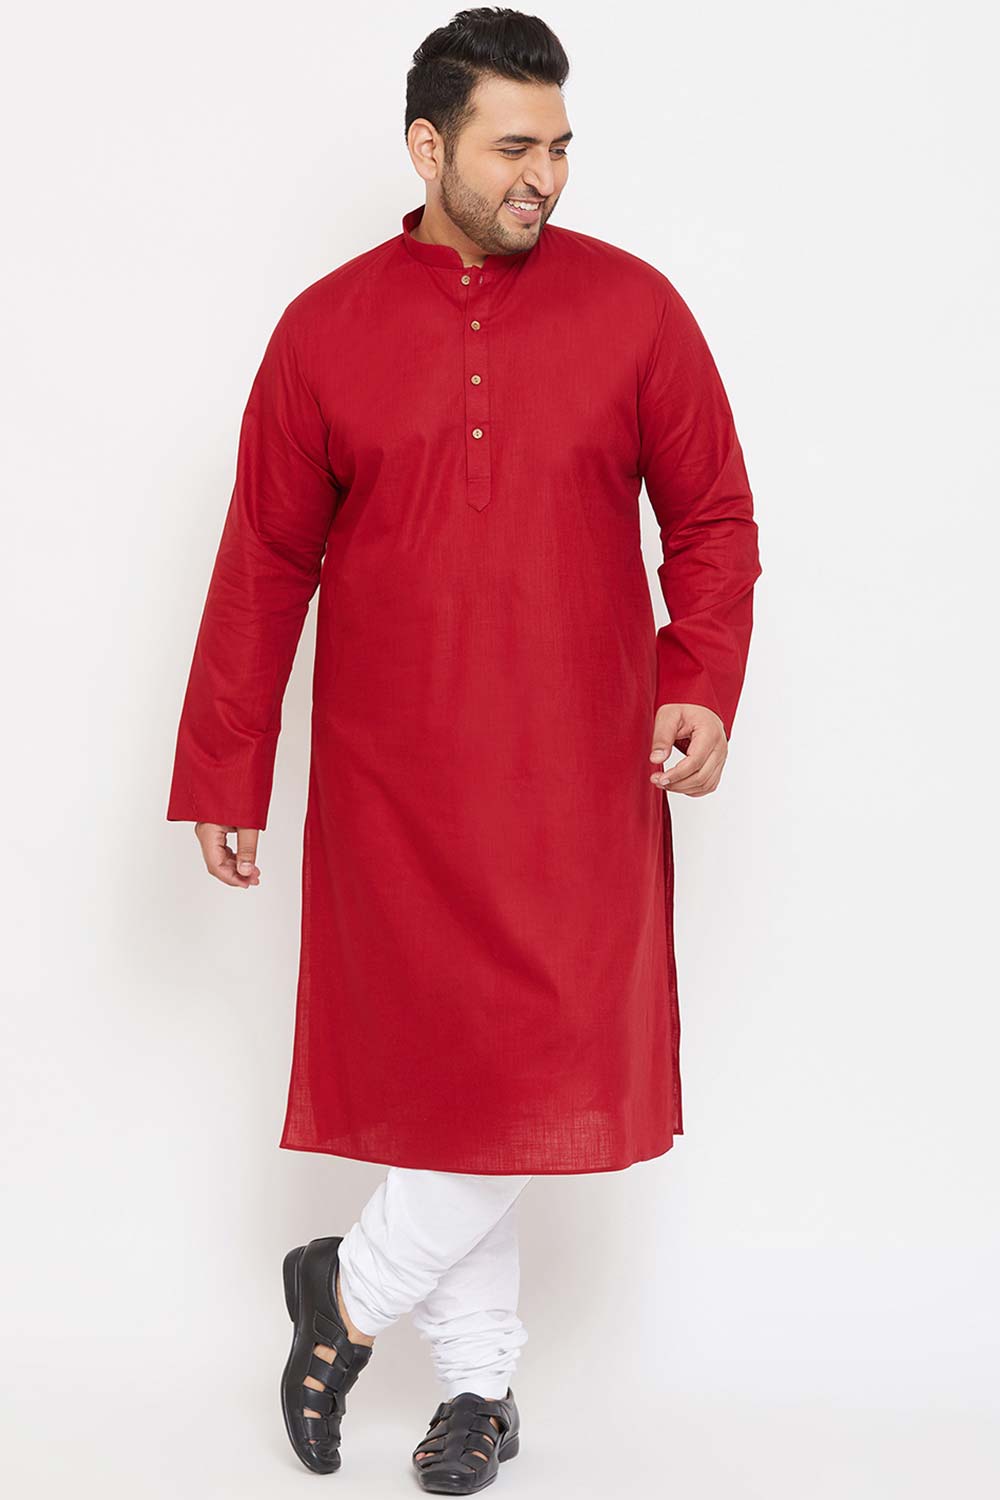 Buy Men's Cotton Blend Solid Kurta in Maroon - Zoom Out